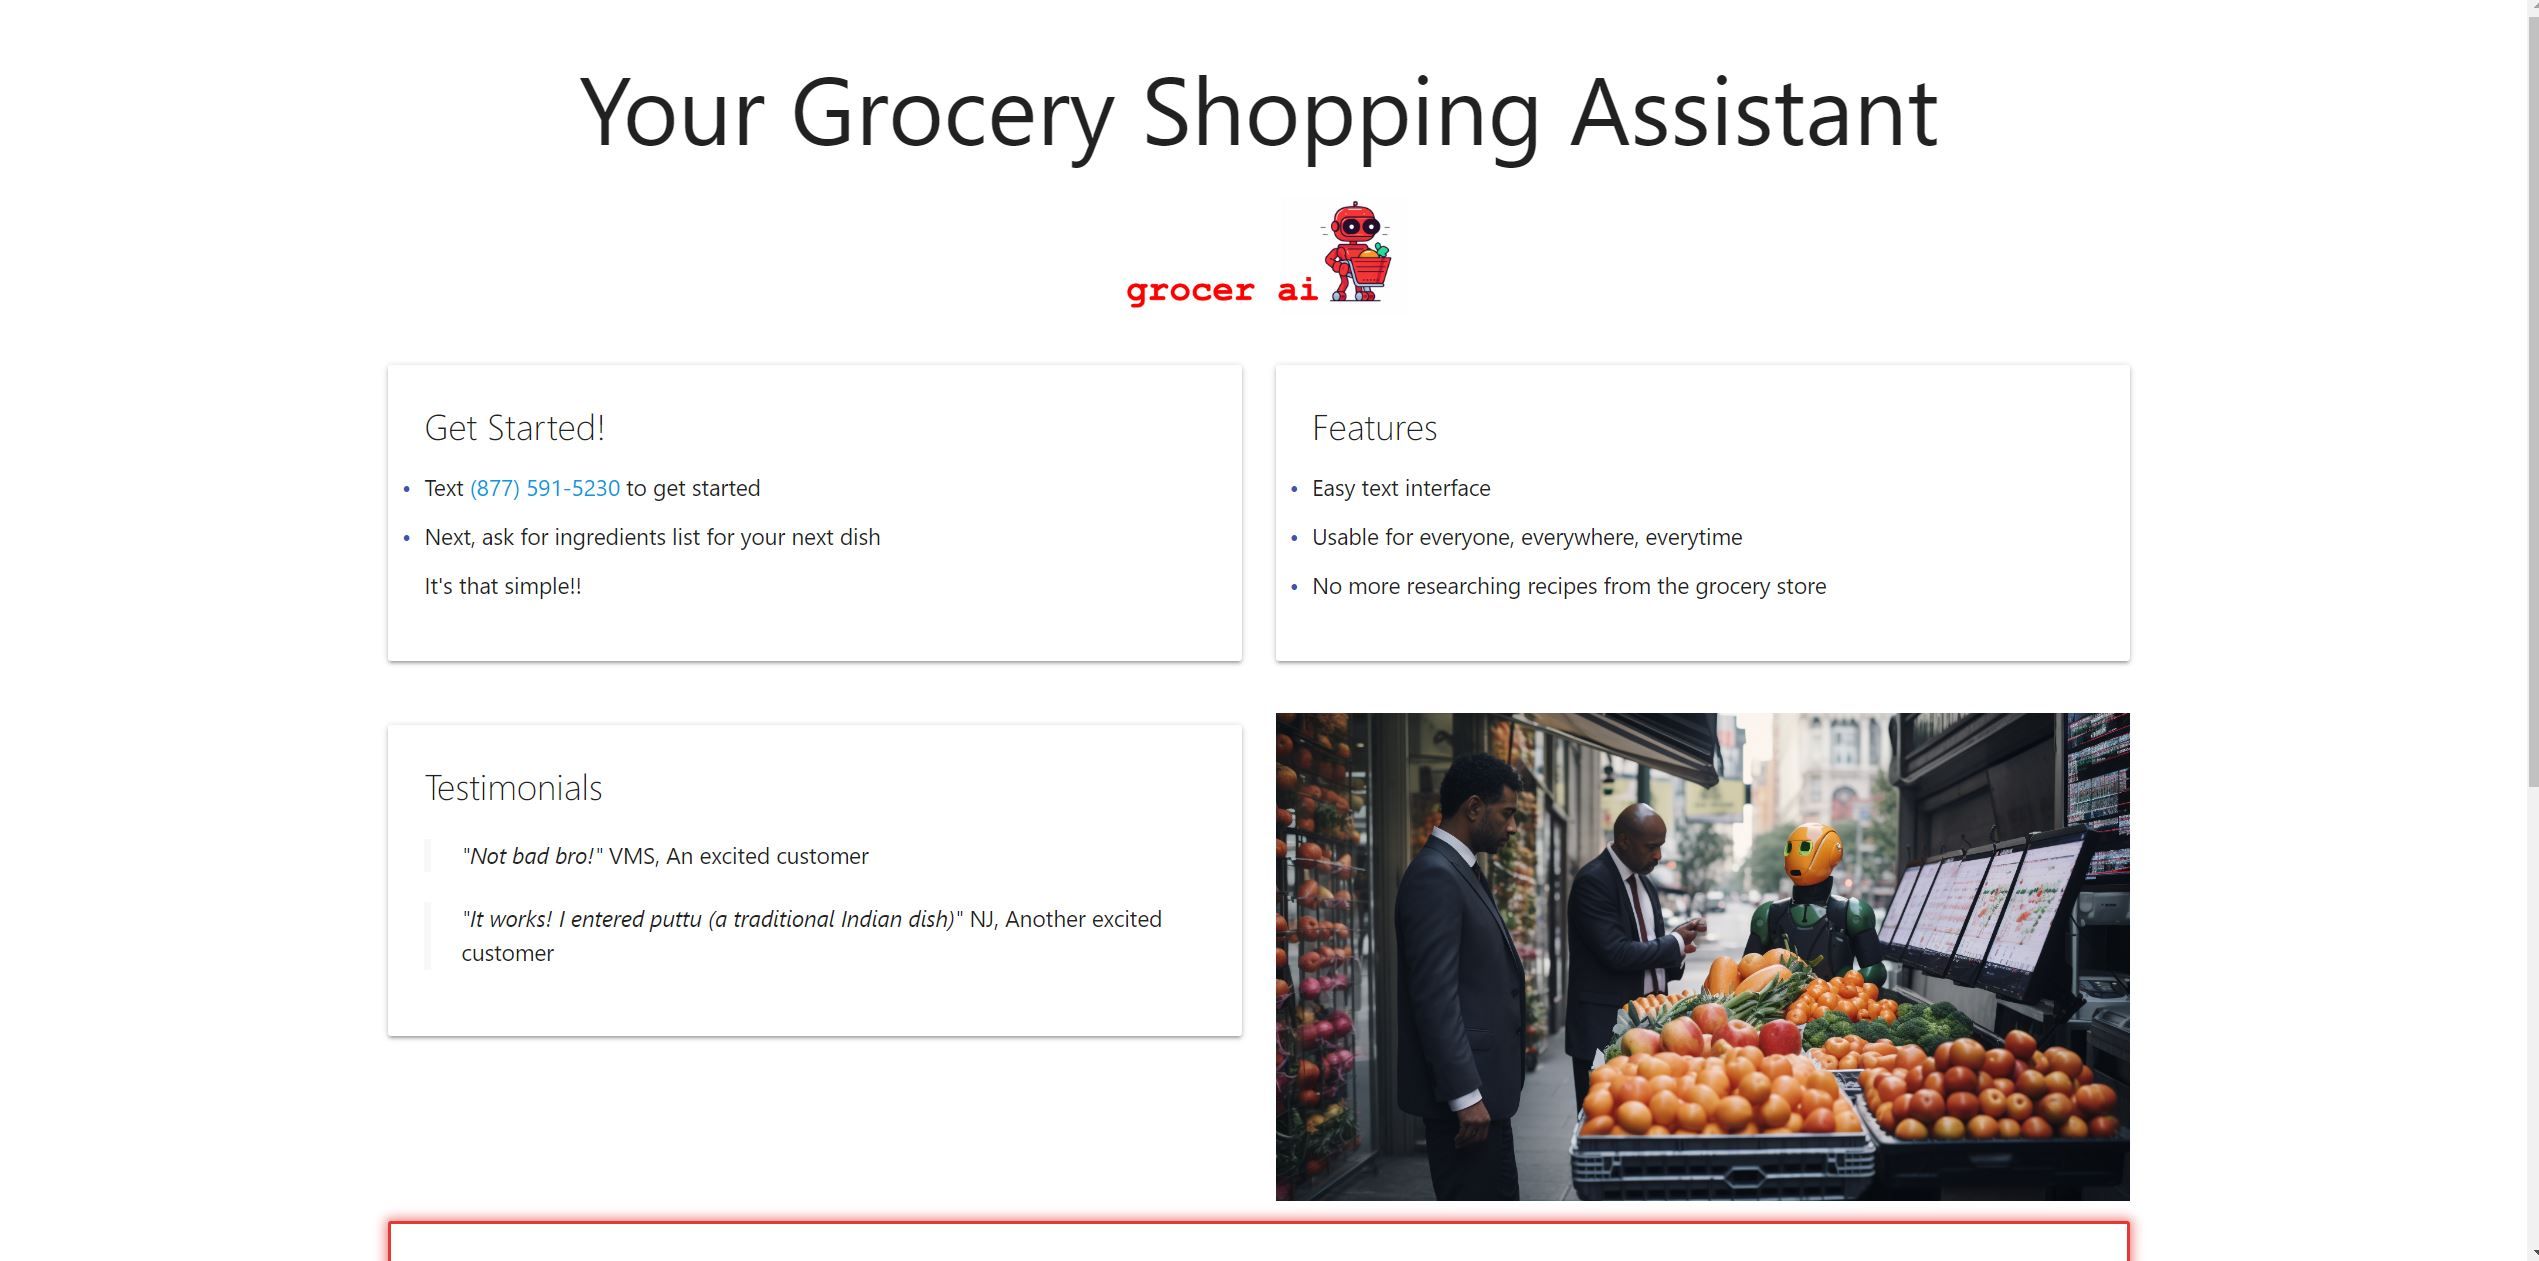 Post: Grocer AI